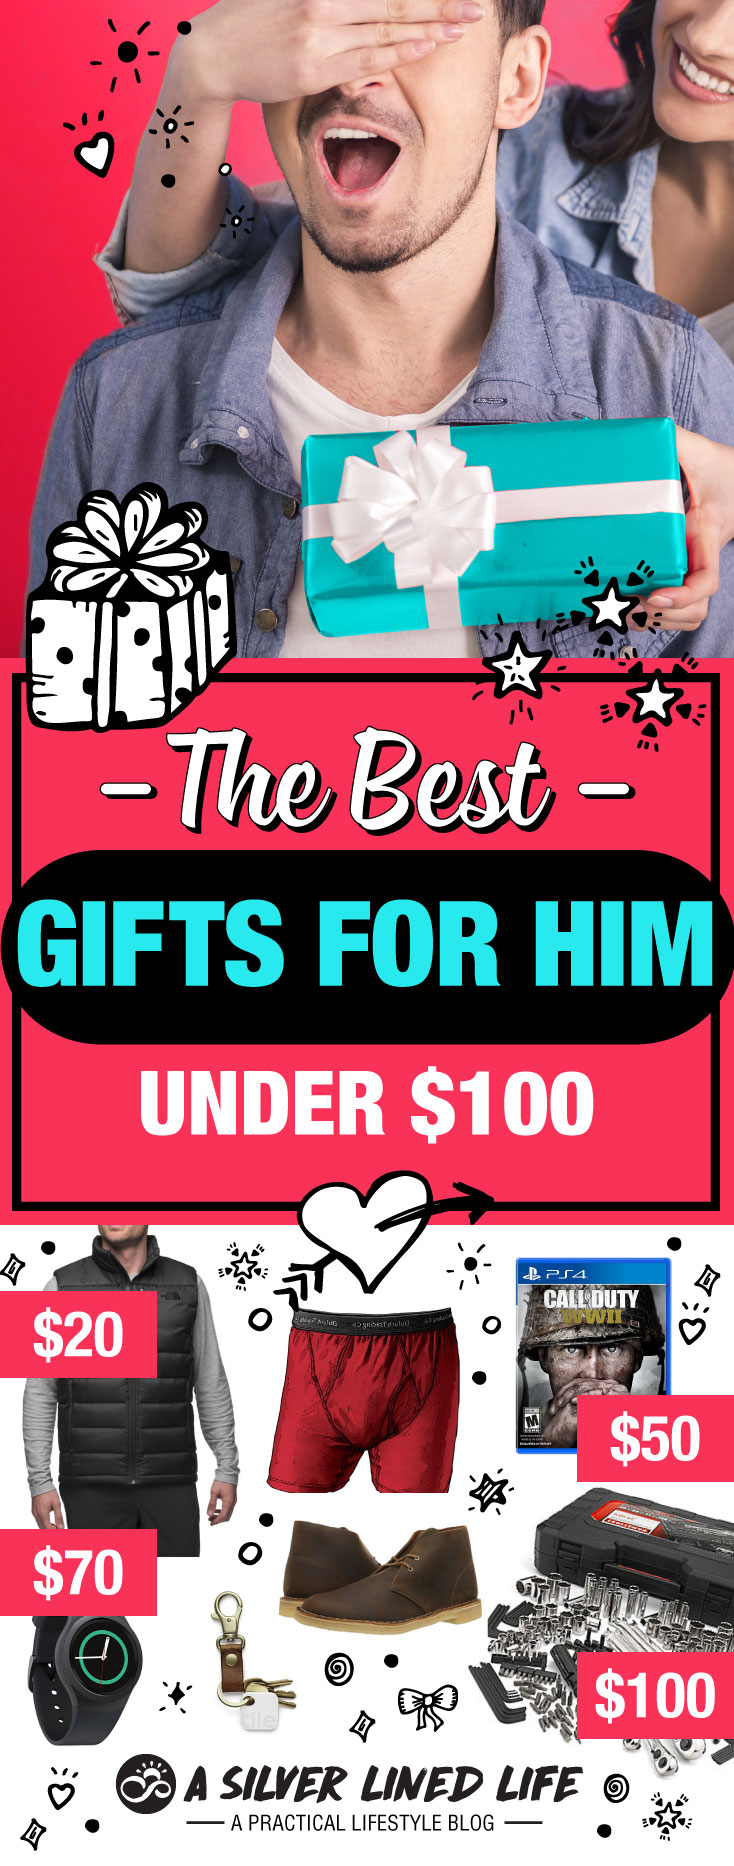 Gifts for boyfriend, gifts for him, gifts for men and gifts for dad, ALL HERE. This is the very BEST LIST EVER! I surveyed dozens of men and asked what Christmas, birthday, anniversary, Valentines etc. they would absolutely love. These ideas are unique, cool and range from cheap to high quality. The very best gifts for men by men! So very glad I did this survey. I learned so much! #SLL #christmas #christmasgifts #gifts #men